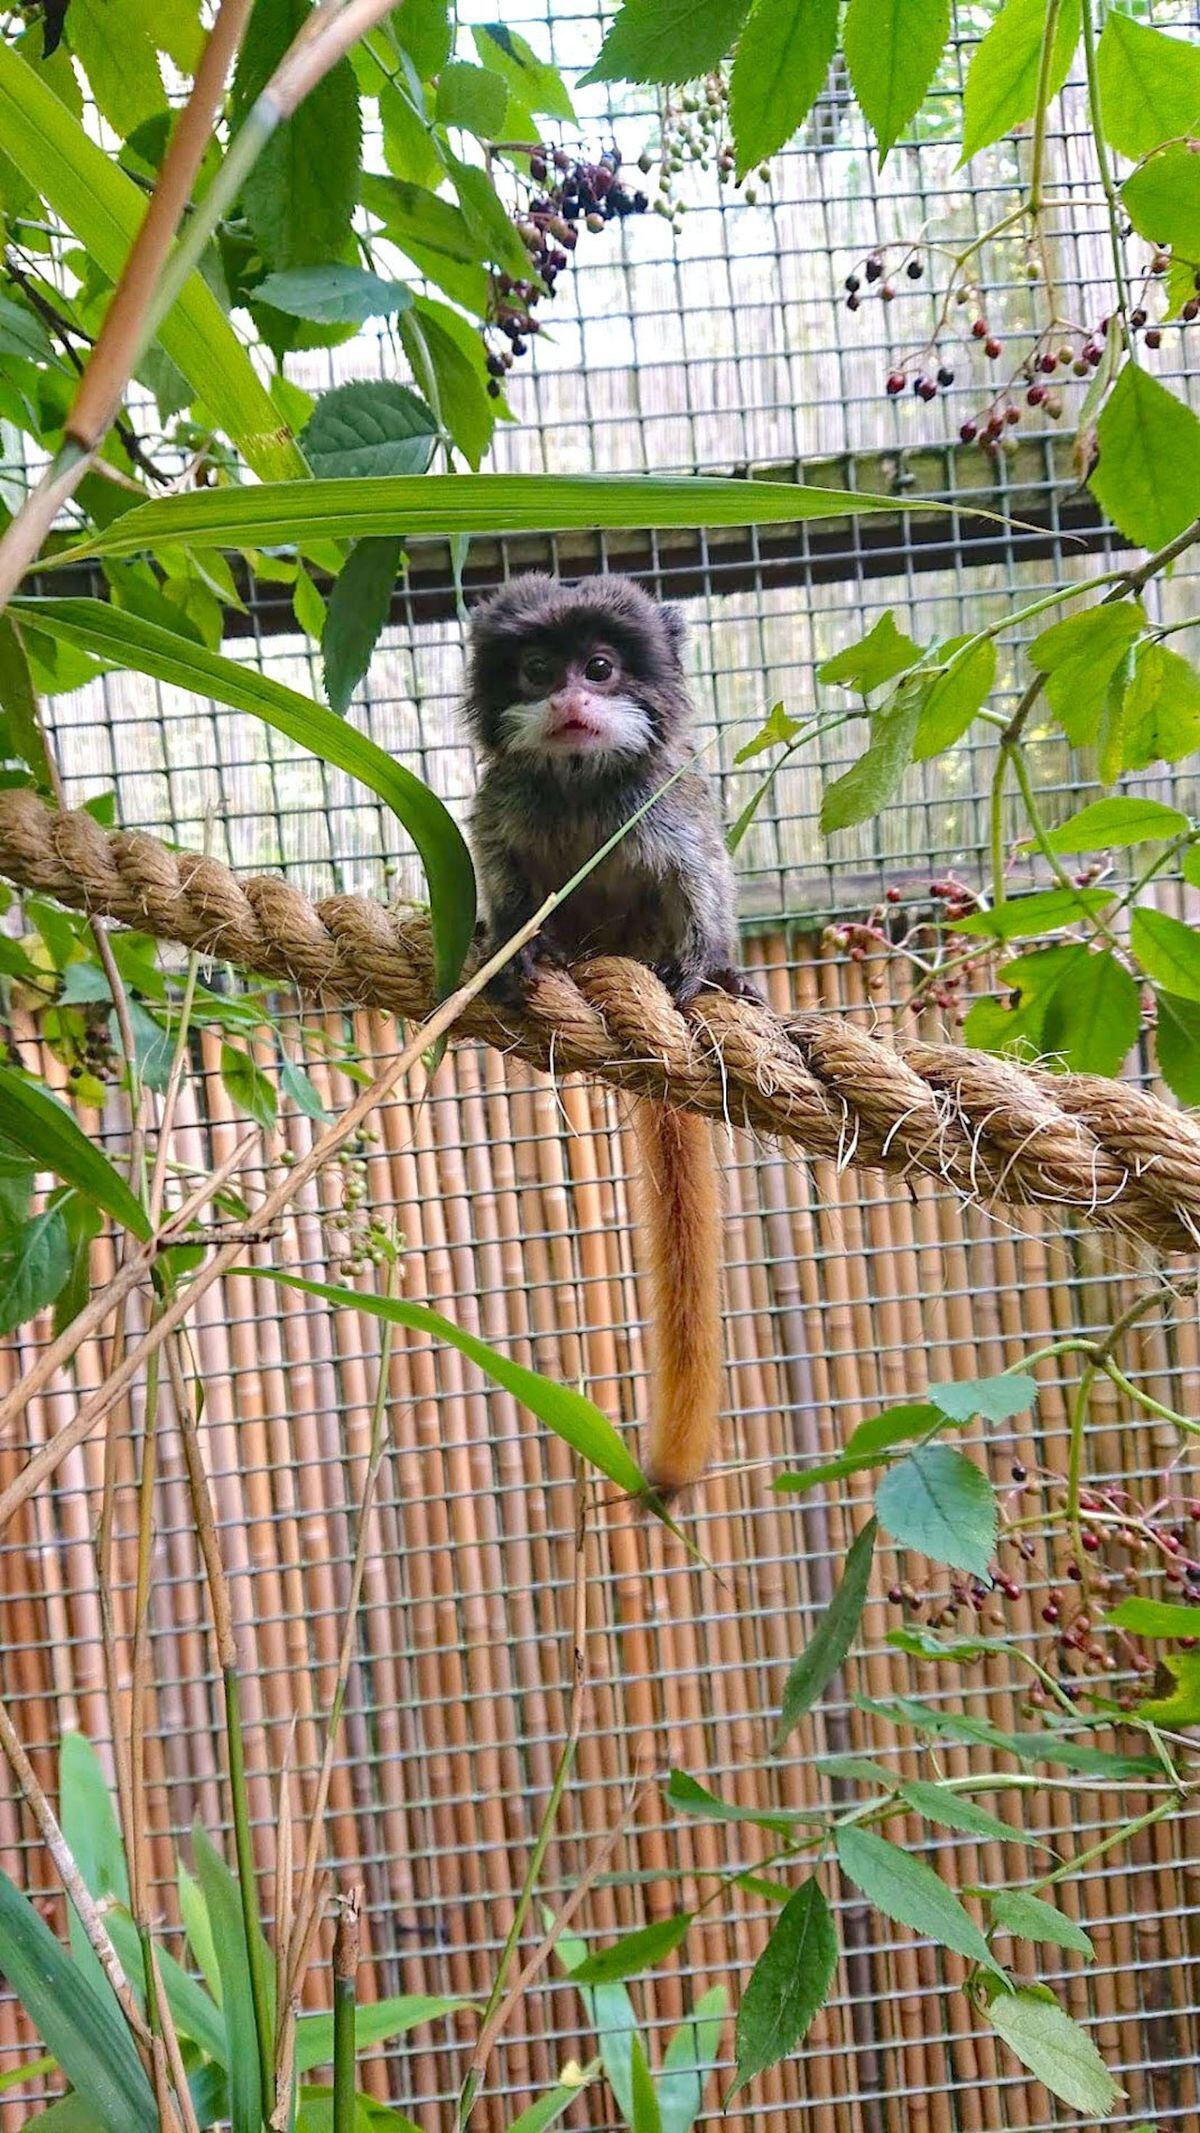 Marmite, the baby Emperor tamarin, born at Dudley Zoo and Castle